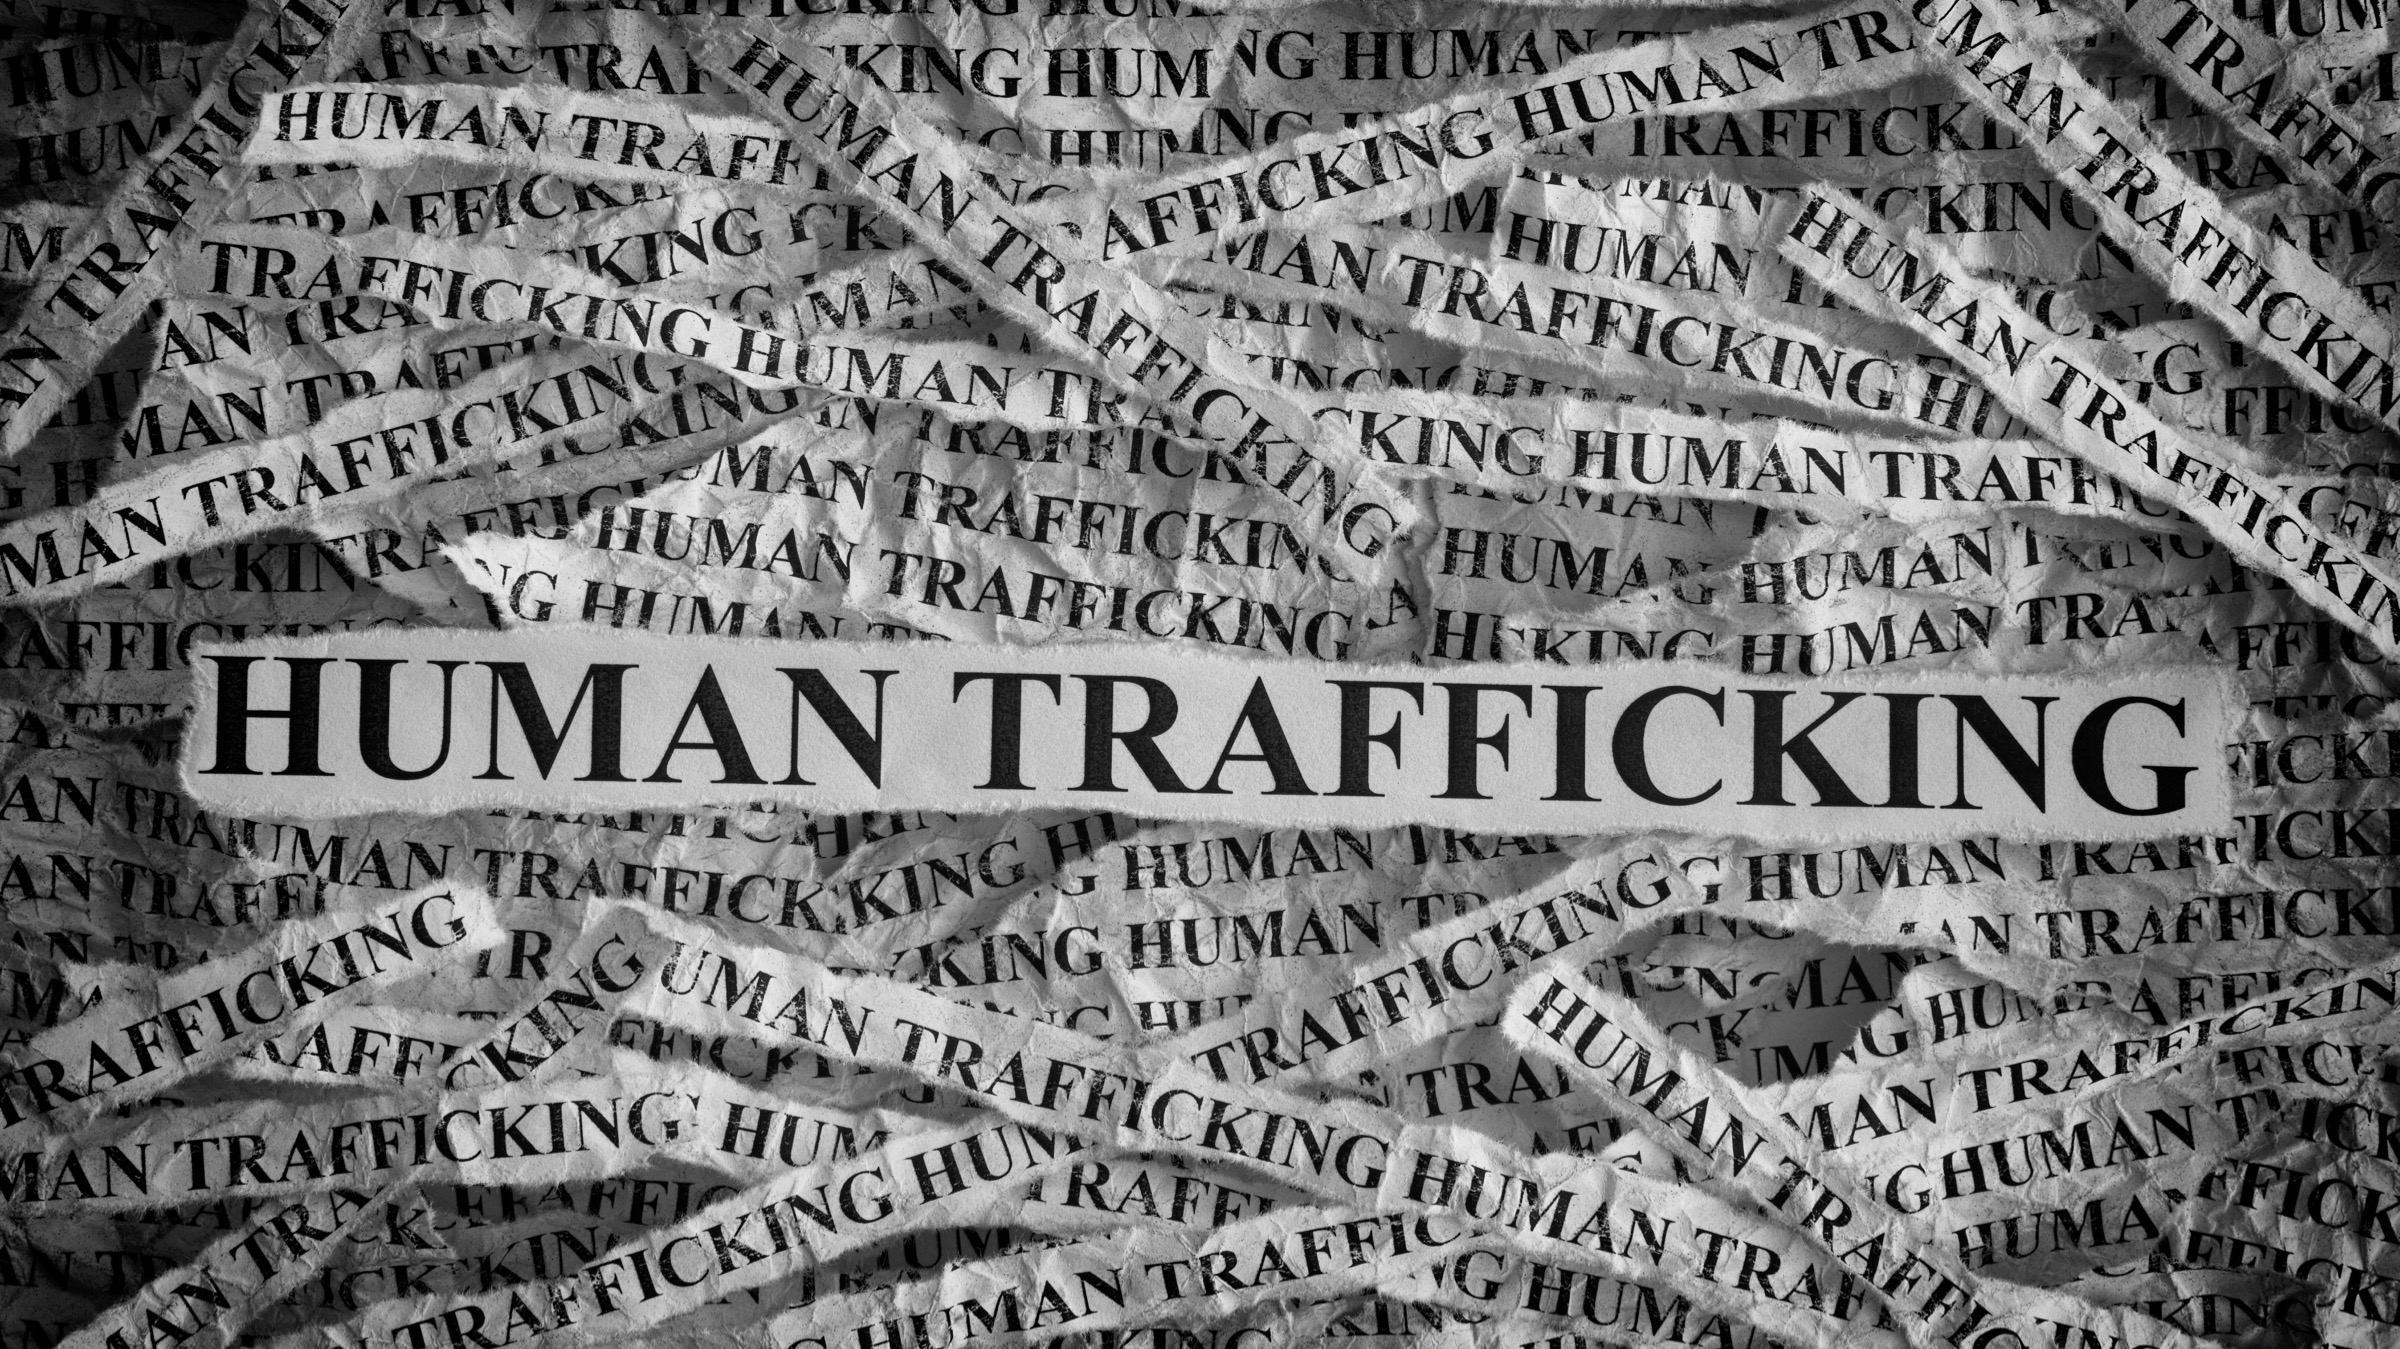 Human Trafficking - Delaware Department of Justice - State of Delaware